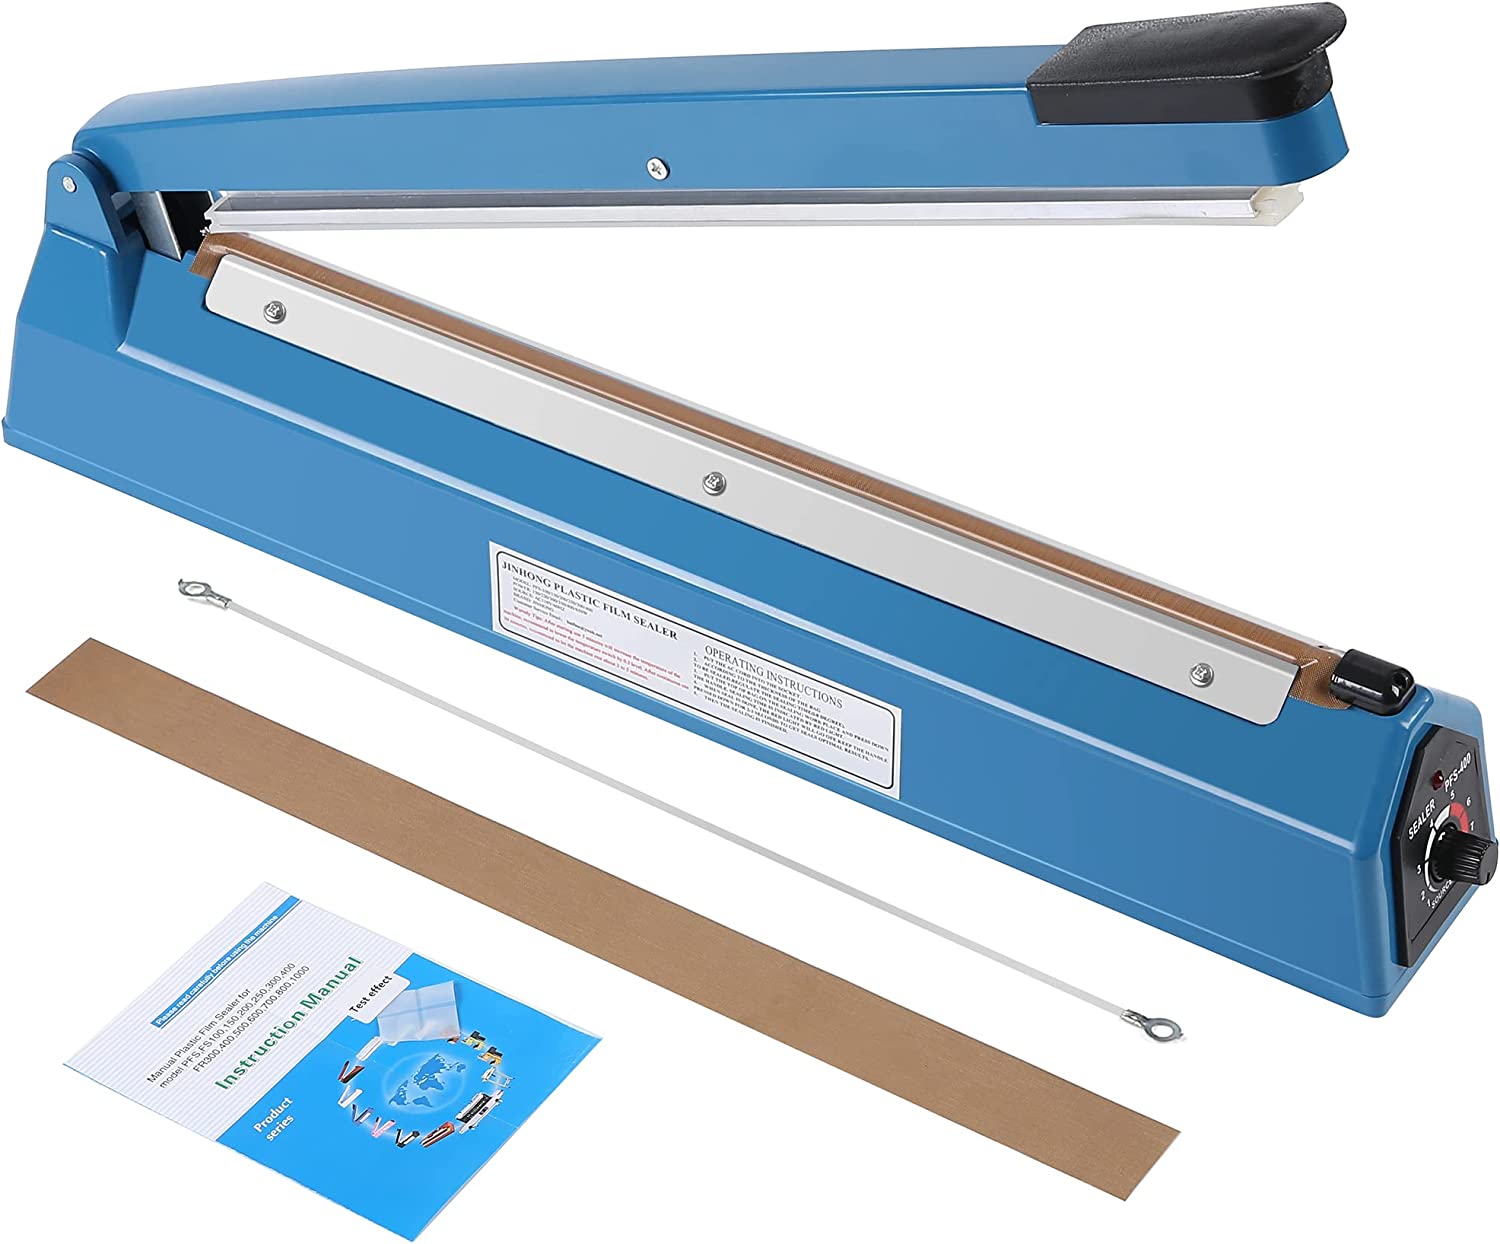 16 Inch Impulse Heat Sealer Manual Bags Sealer Sealing Machine Heating Closer for Plastic PE PP Mylar Poly Foil Bags Home Restaurant Food Storage with Extra Replace Element